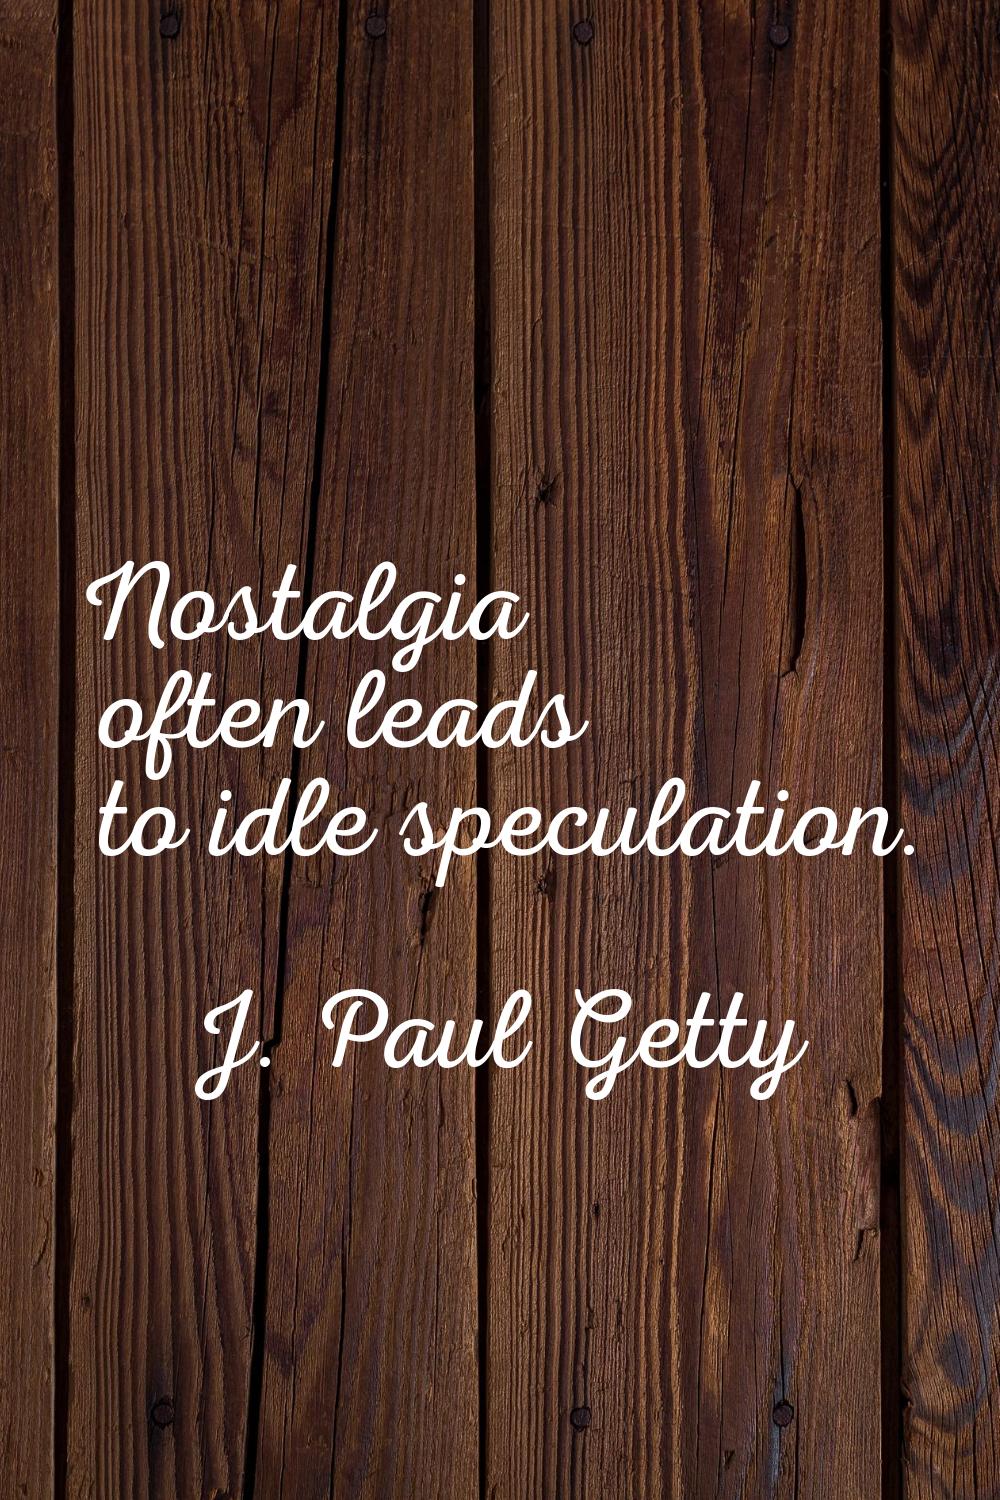 Nostalgia often leads to idle speculation.